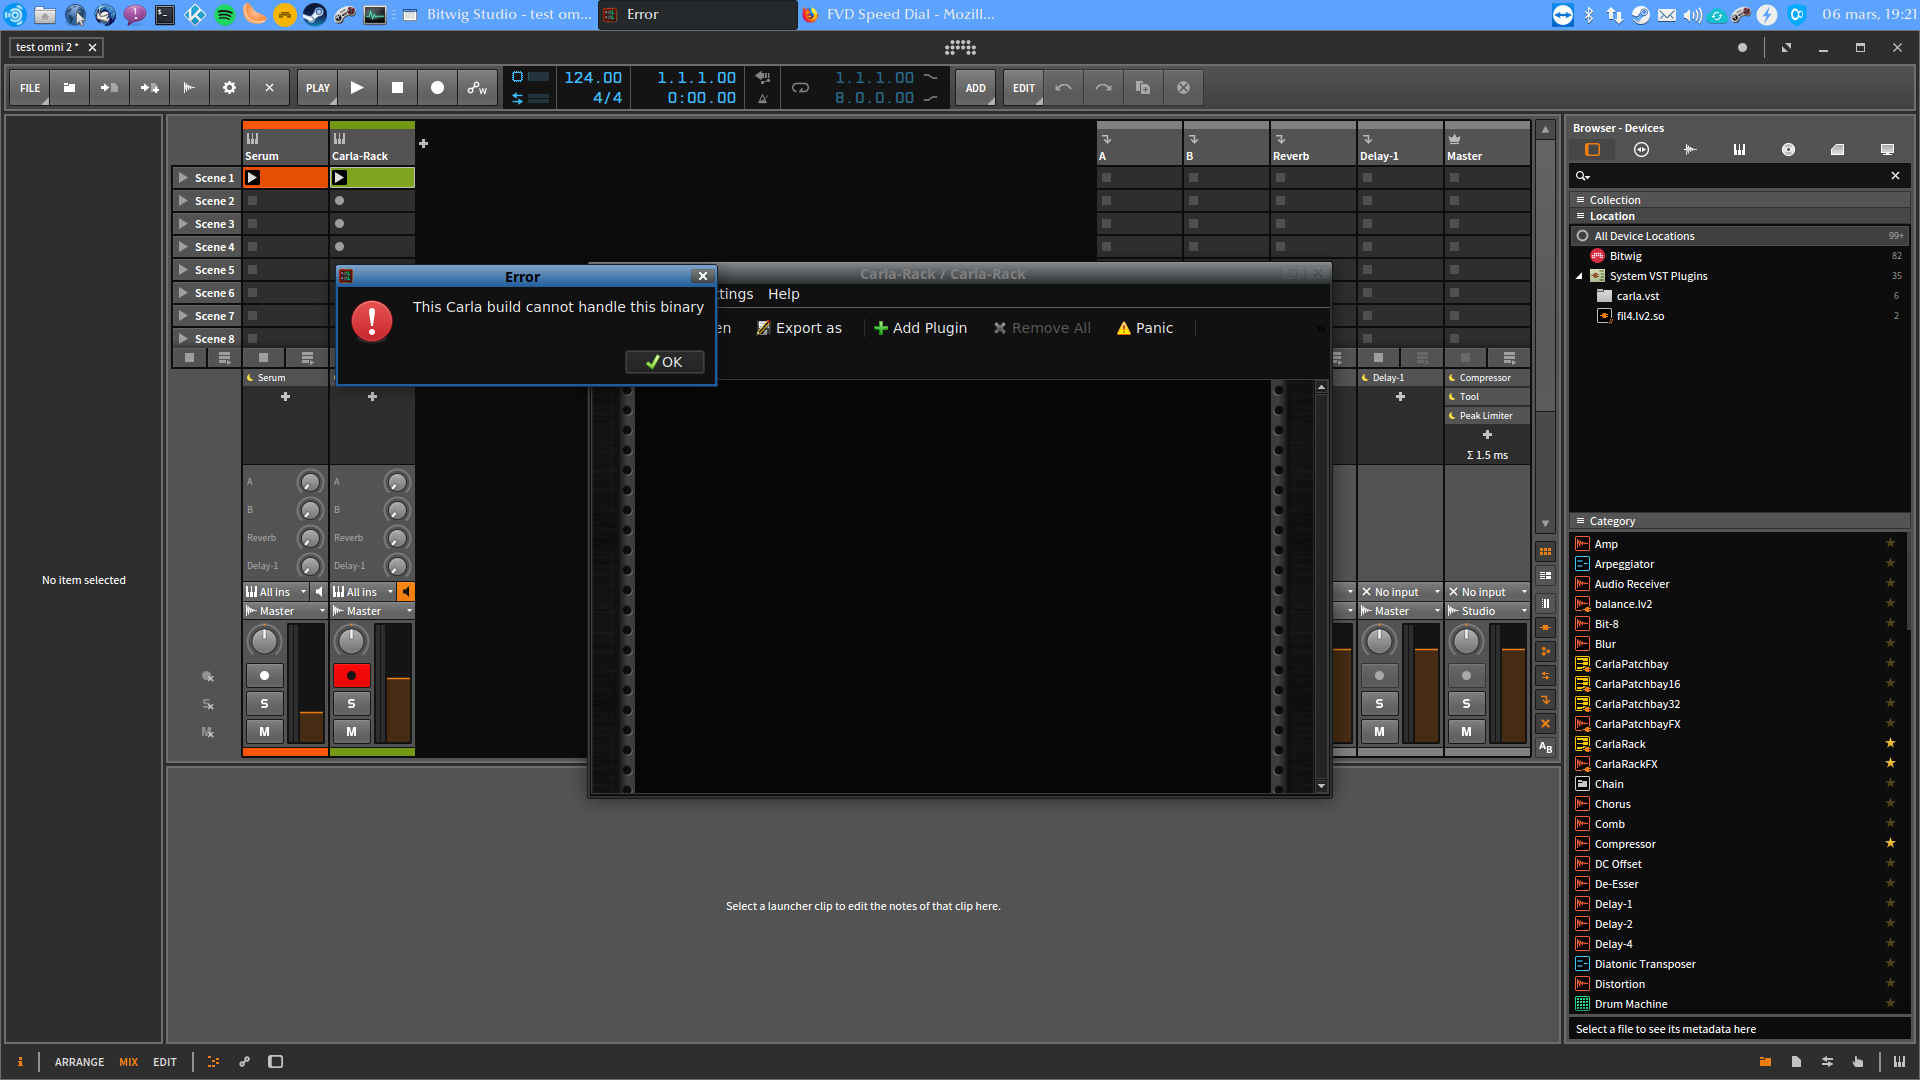 how to patch omnisphere dll